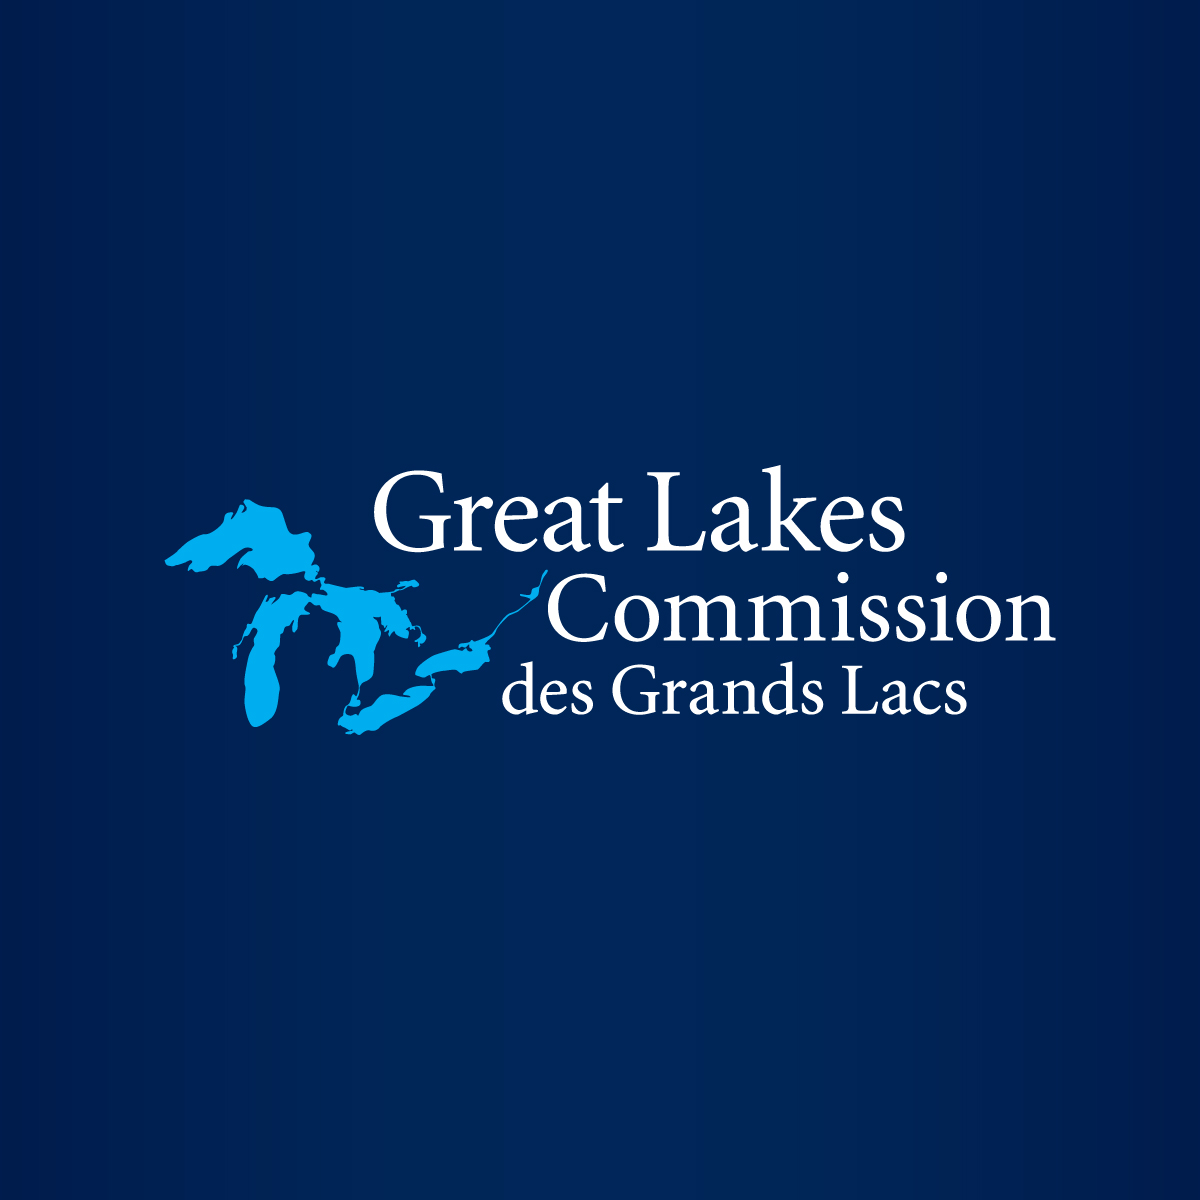 Why most Minnesota lakes put the ‘Lake’ part of the name second